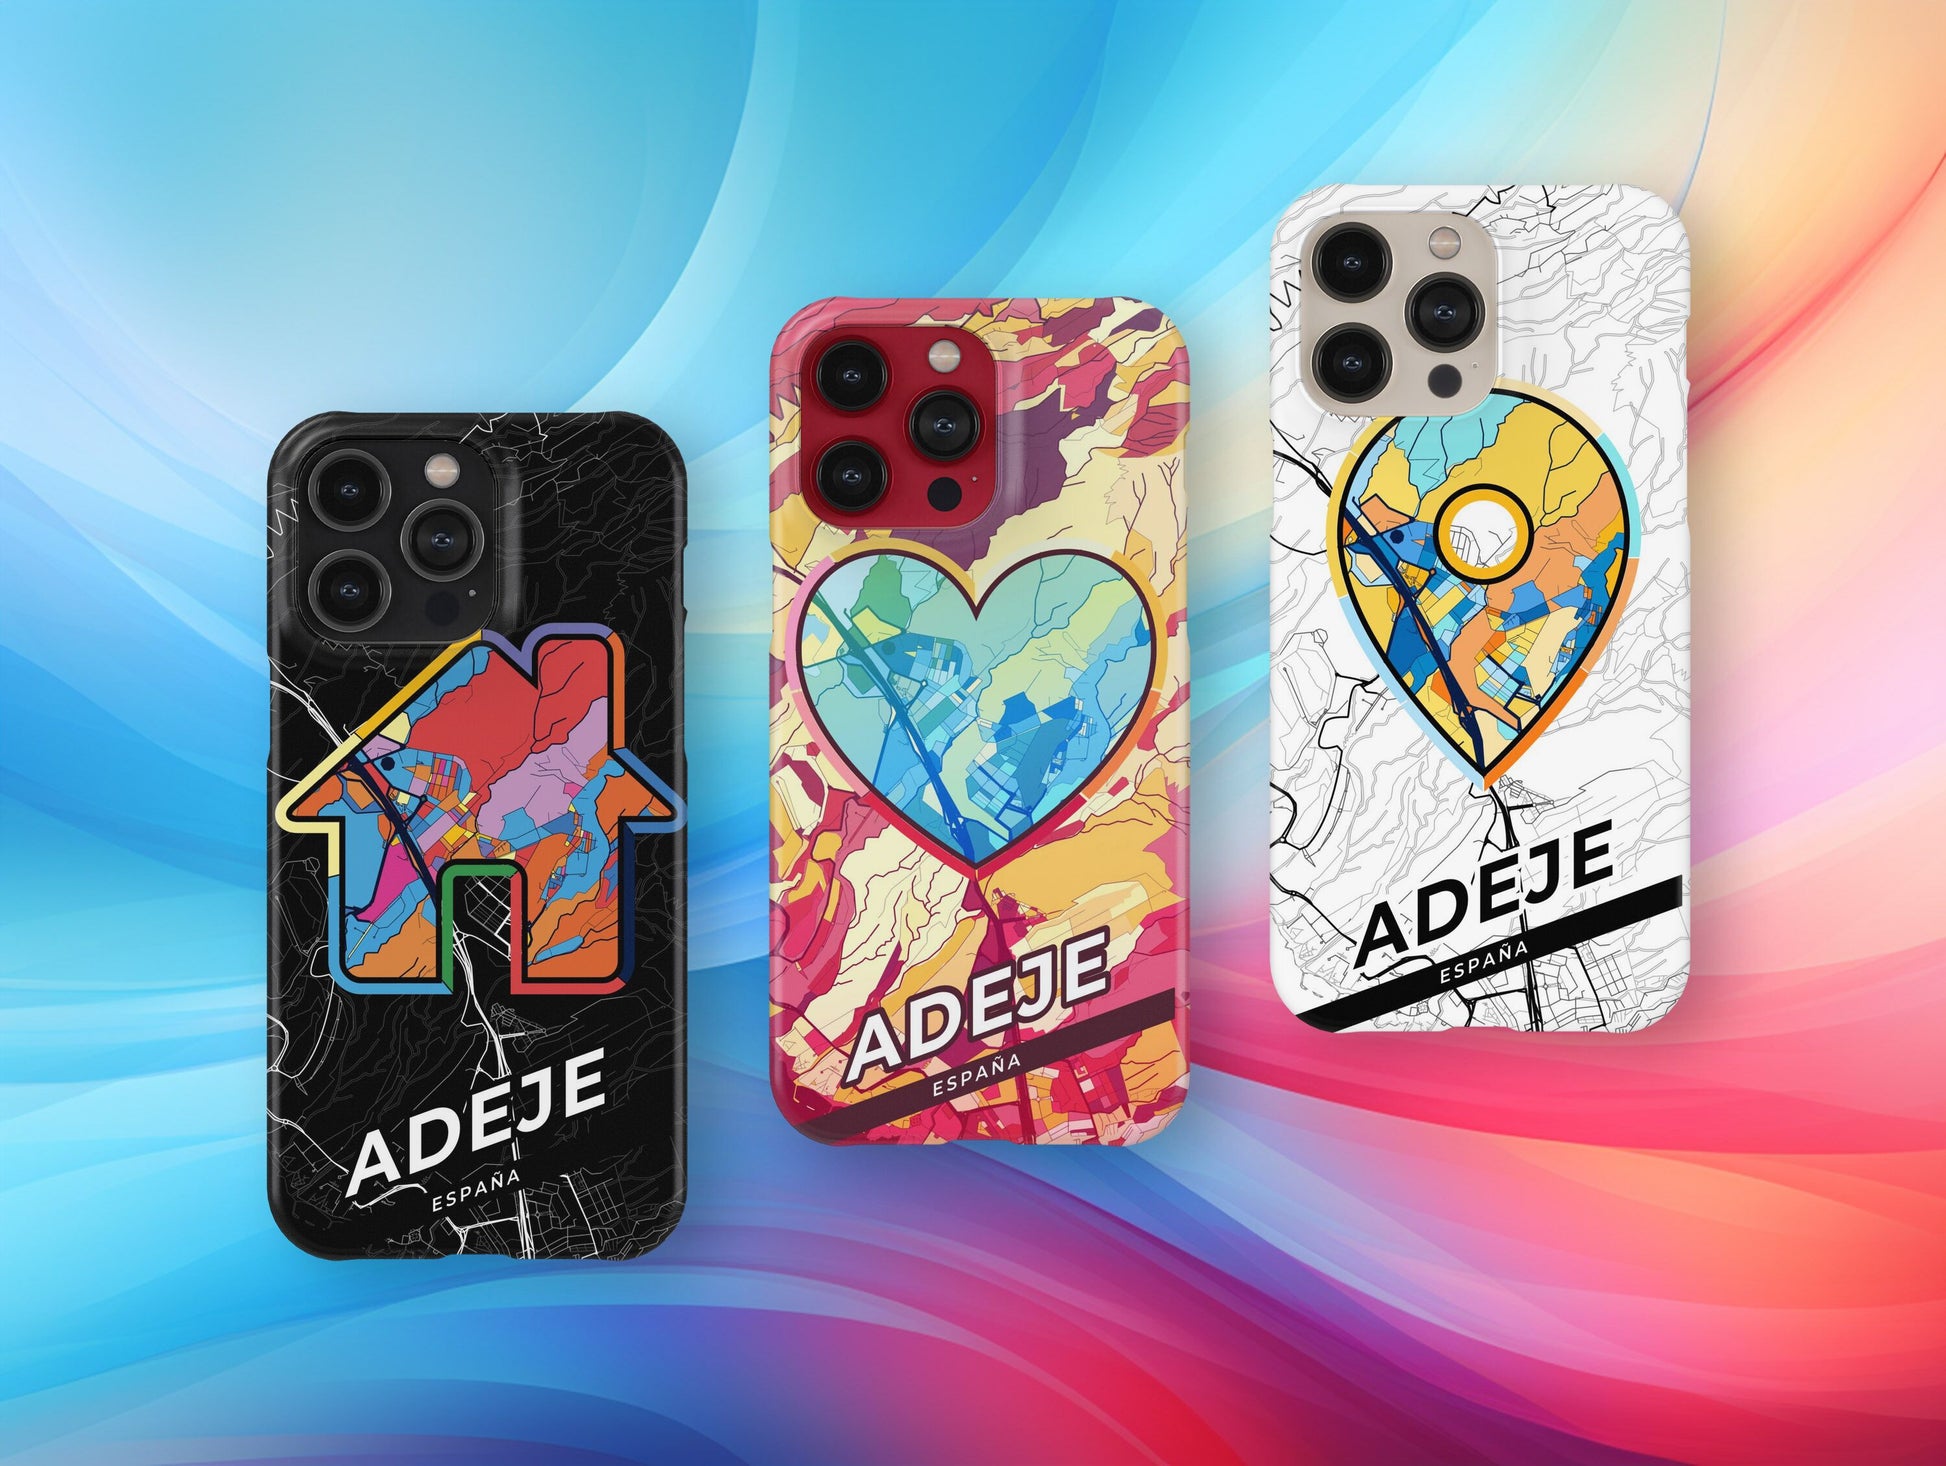 Adeje Spain slim phone case with colorful icon. Birthday, wedding or housewarming gift. Couple match cases.